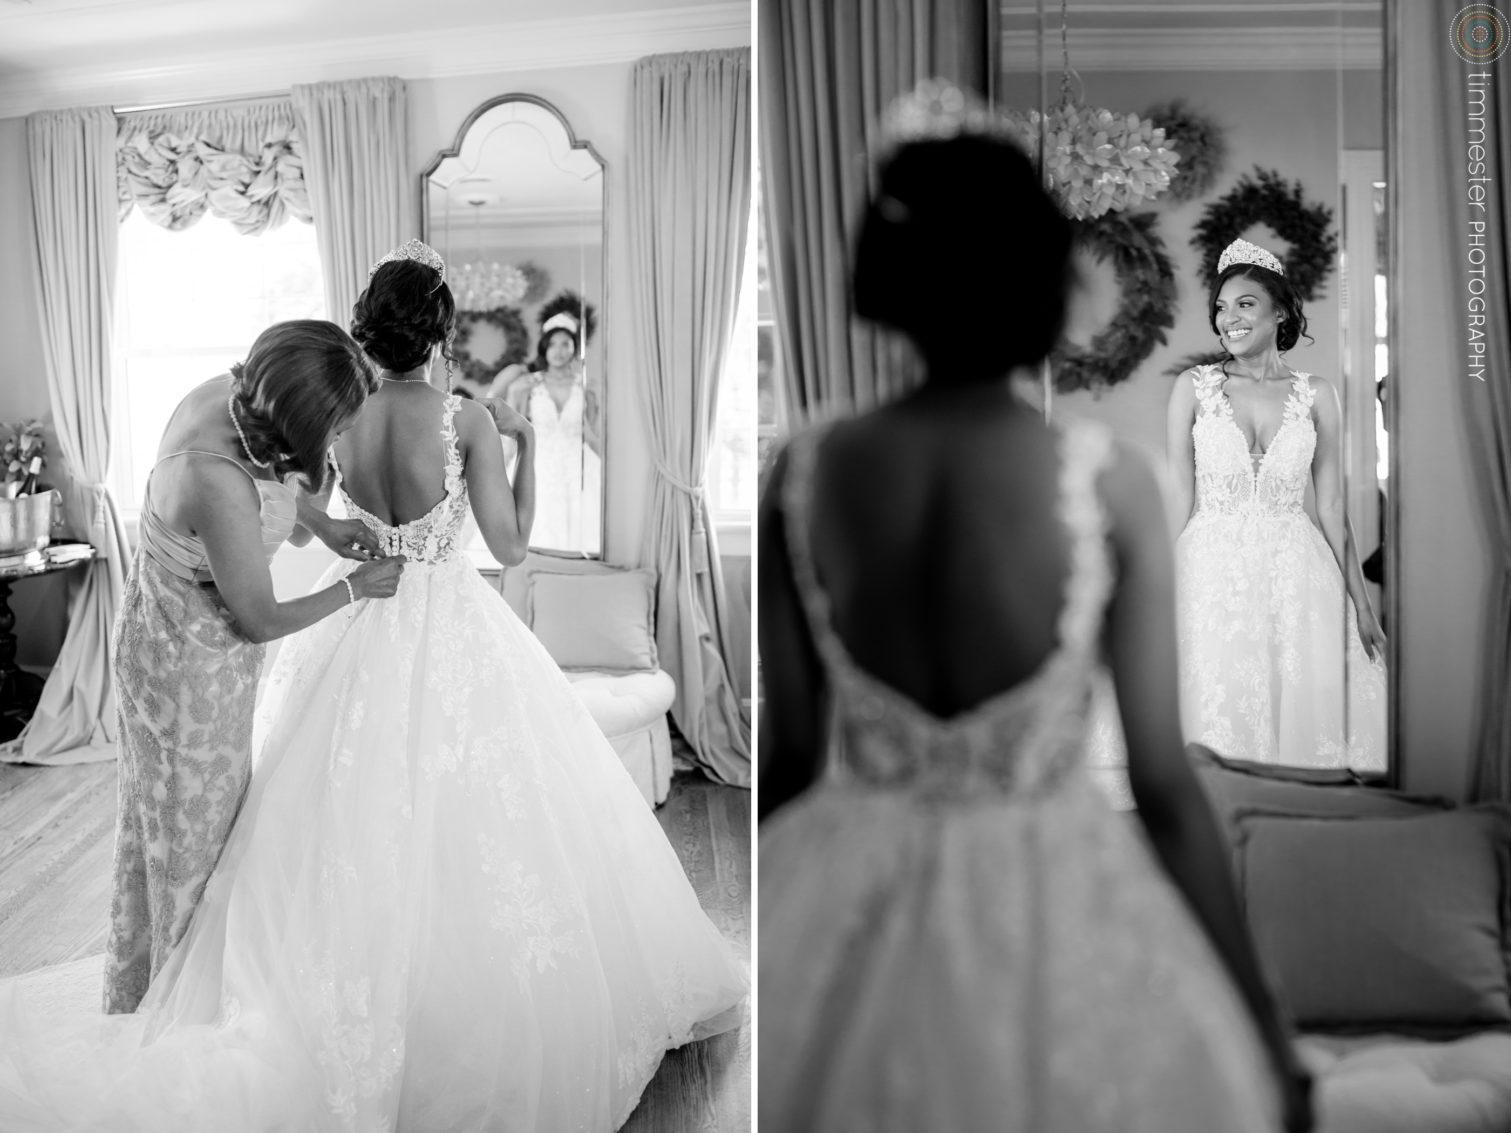 The bride gets ready for her wedding at Highgrove Estate in Fuquay-Varina.